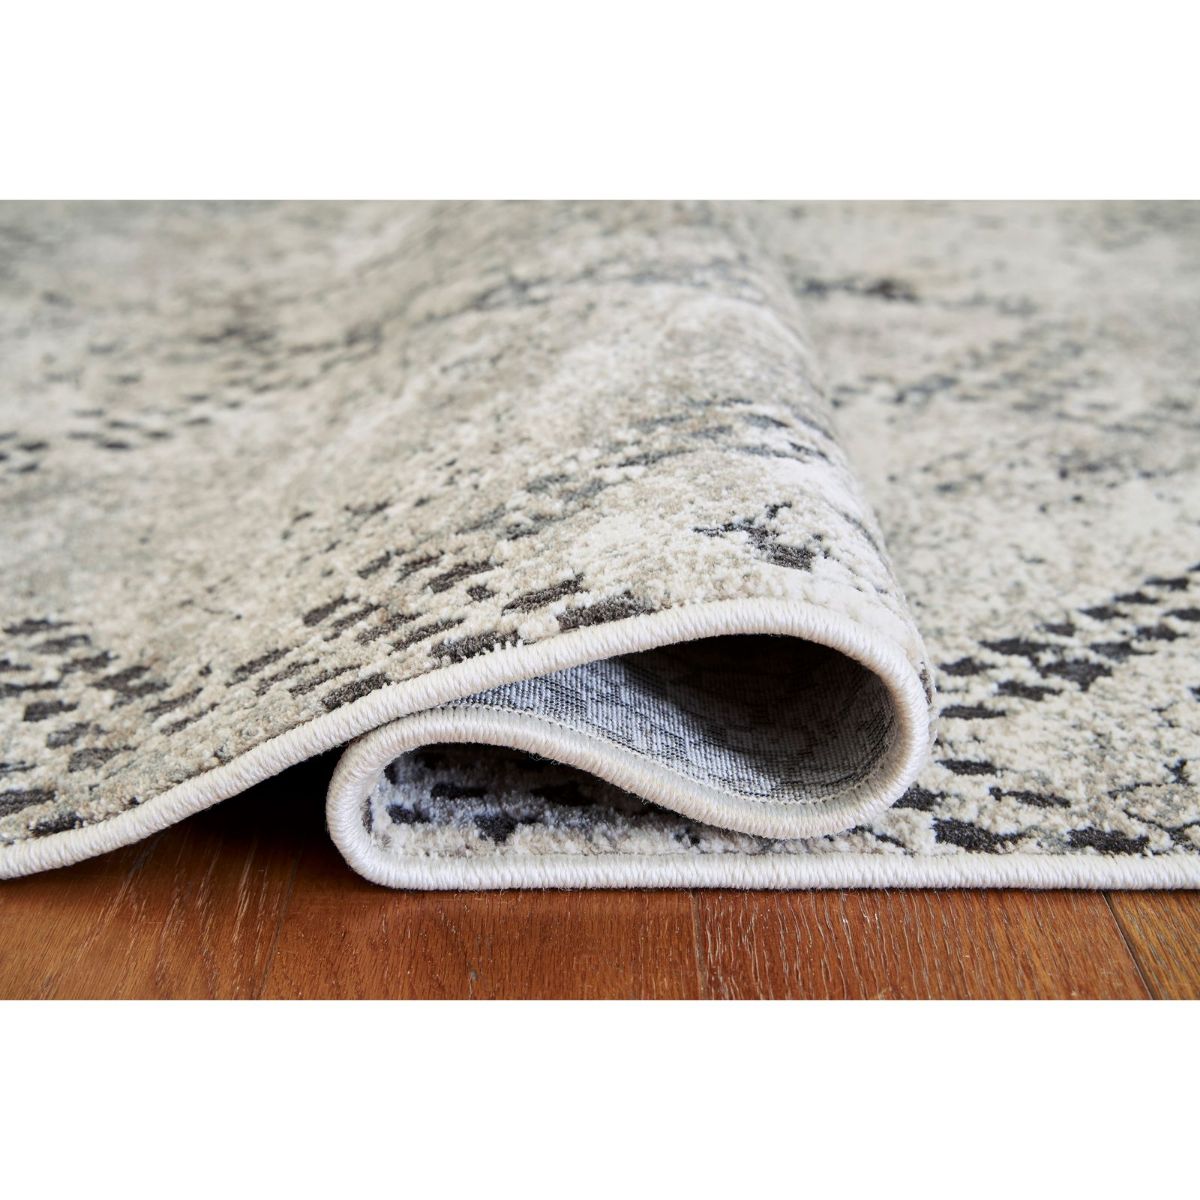 Picture of Poincilana 5’ x 7’ Rug